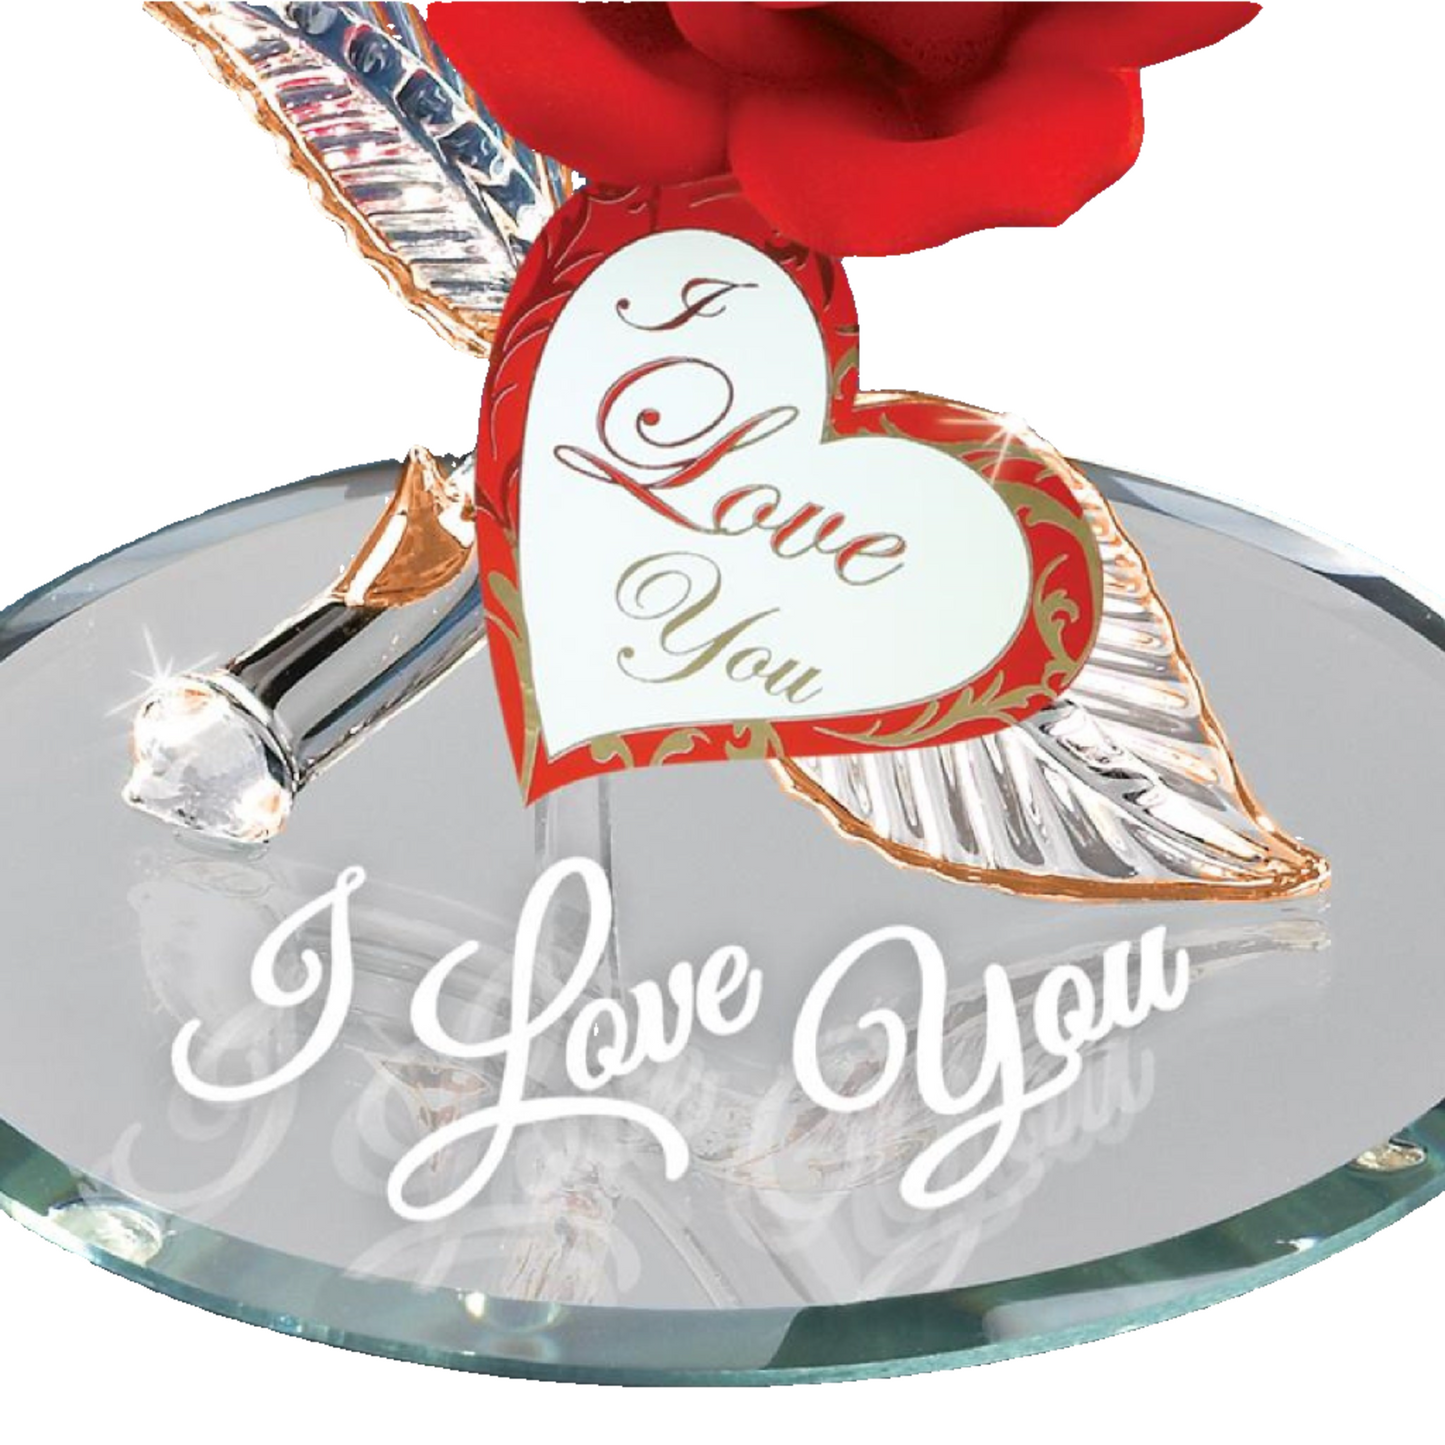 Glass Baron "I Love You" Red Rose on Mirror Figurine